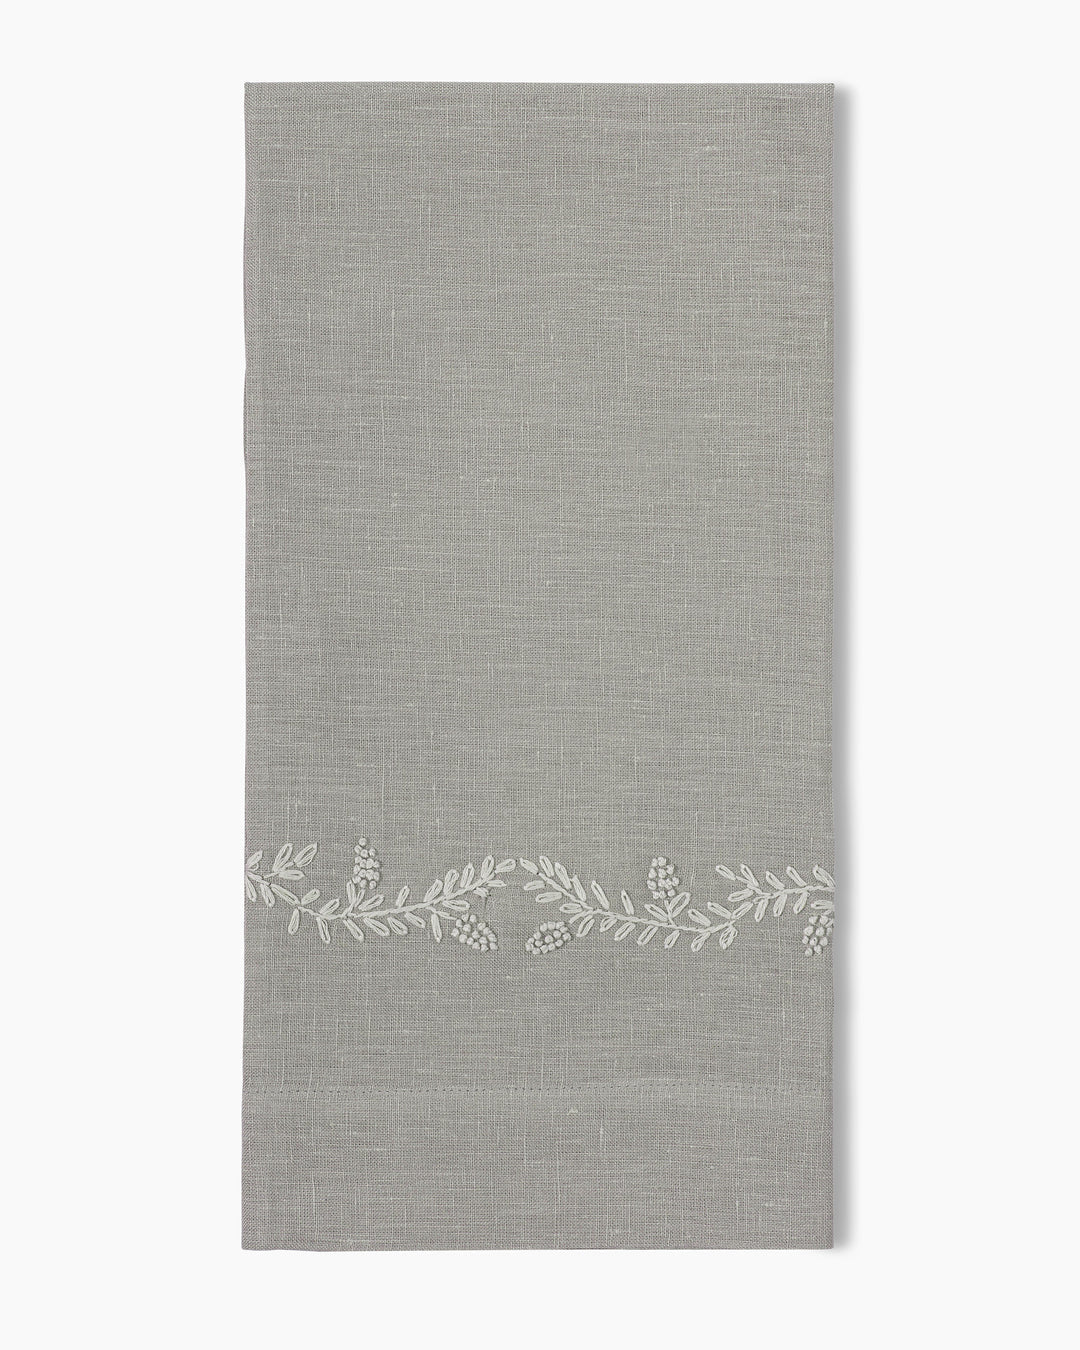 Prism Vine Linen Hand Towels in Grey, Set of Two